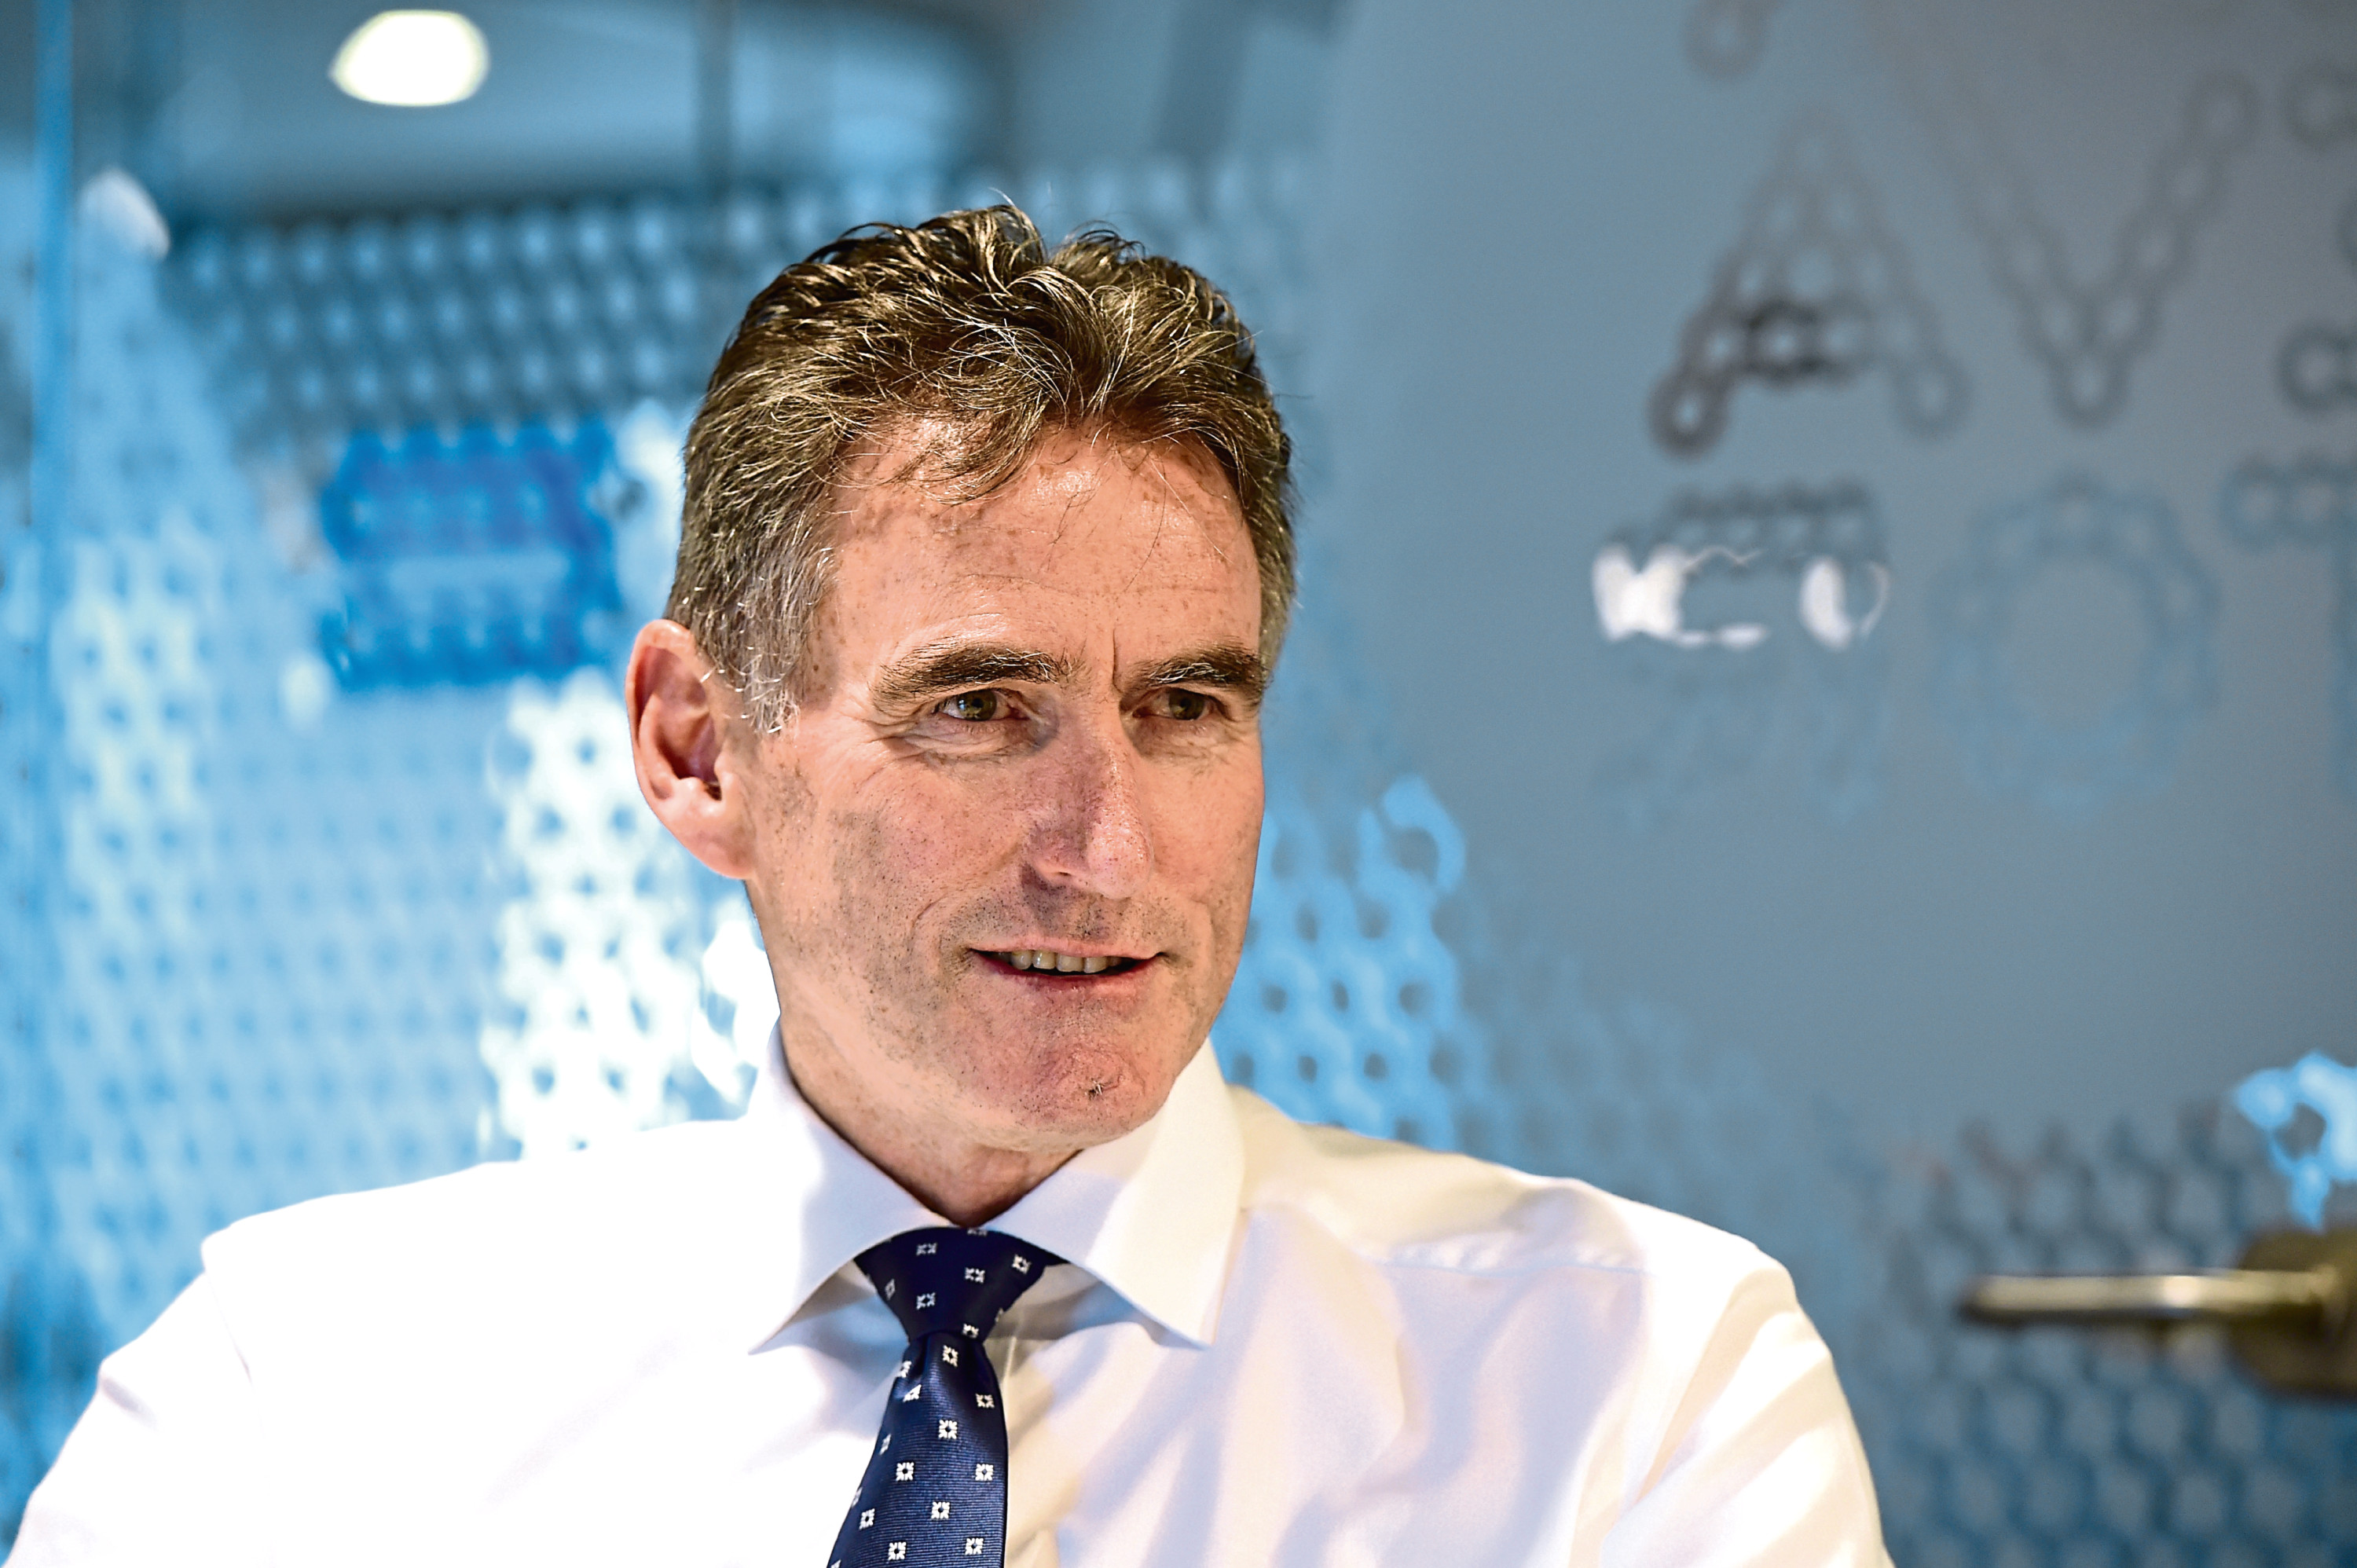 Royal Bank of Scotland Chief Executive, Ross McEwan, at The Hub, Aberdeen Energy Park.  

Picture by KEVIN EMSLIE